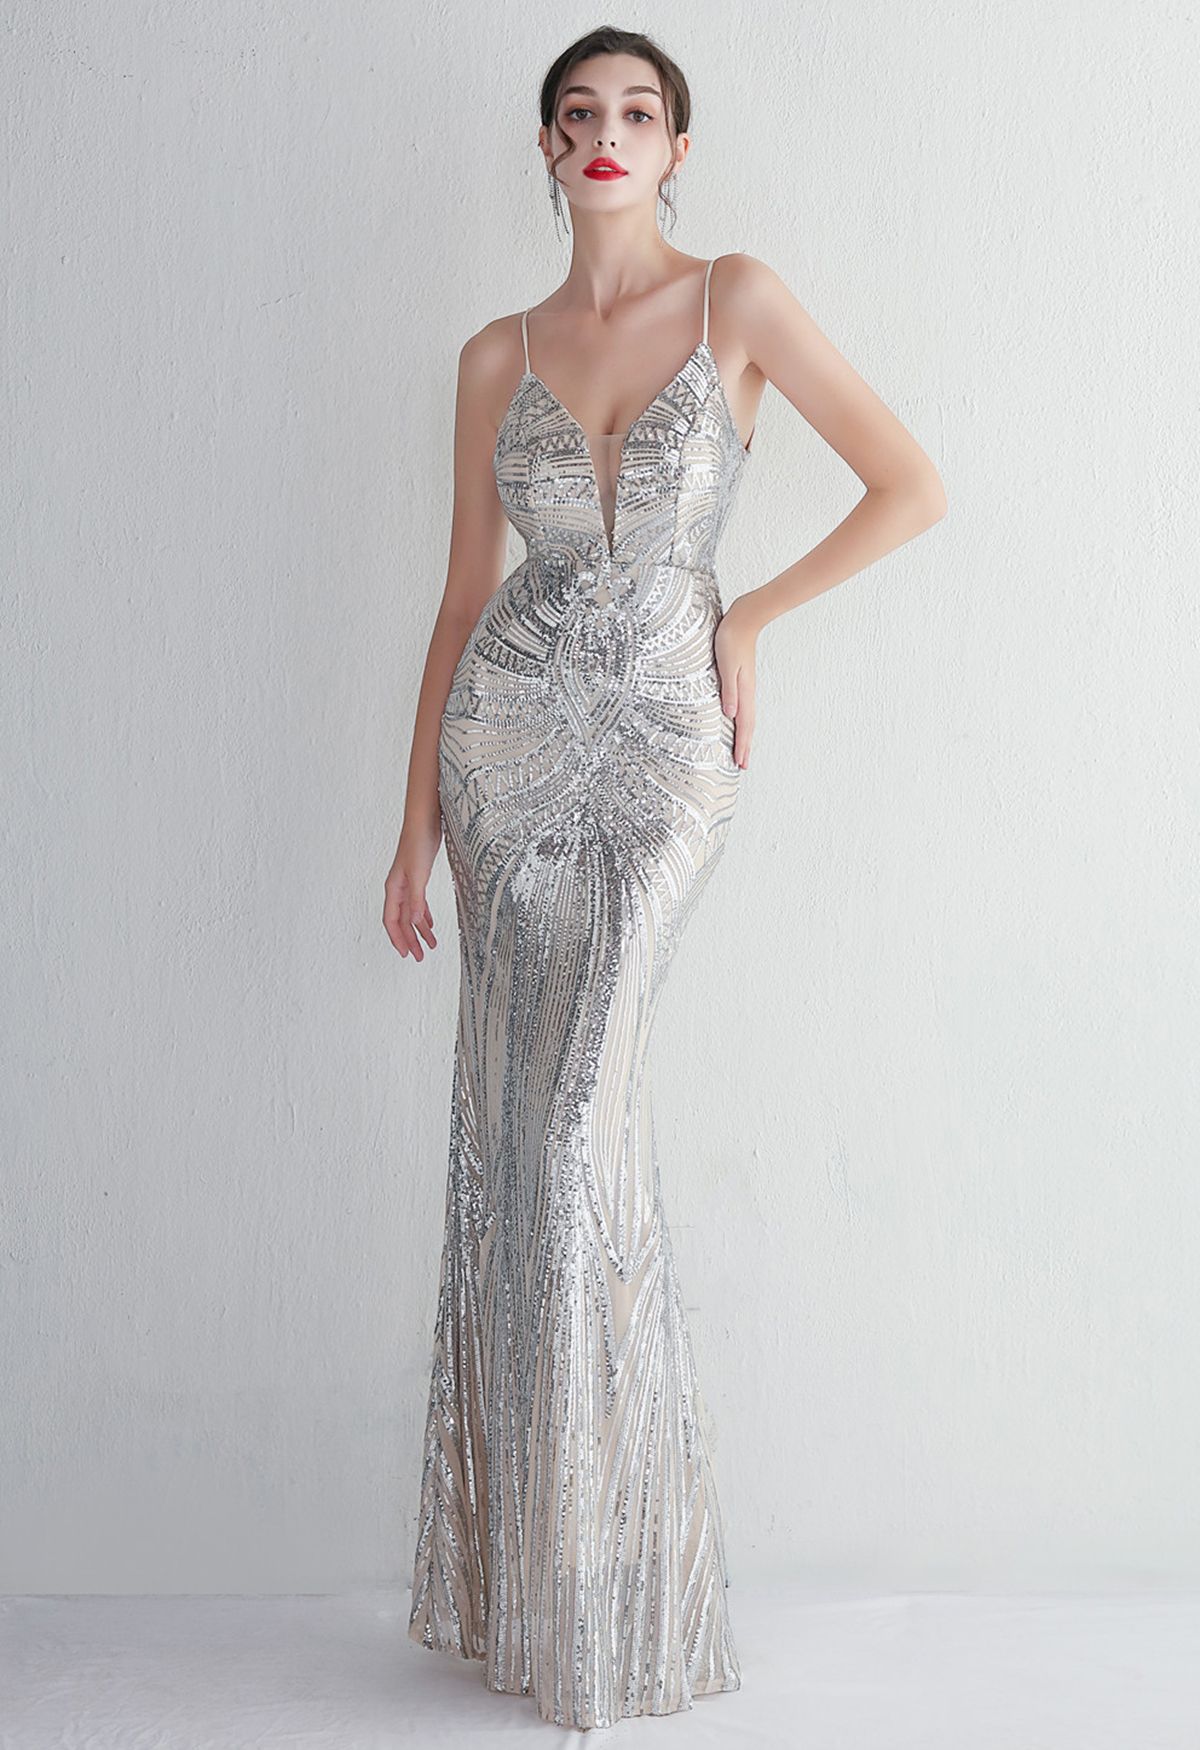 Glimmer Sequin Mermaid Cami Gown in Silver